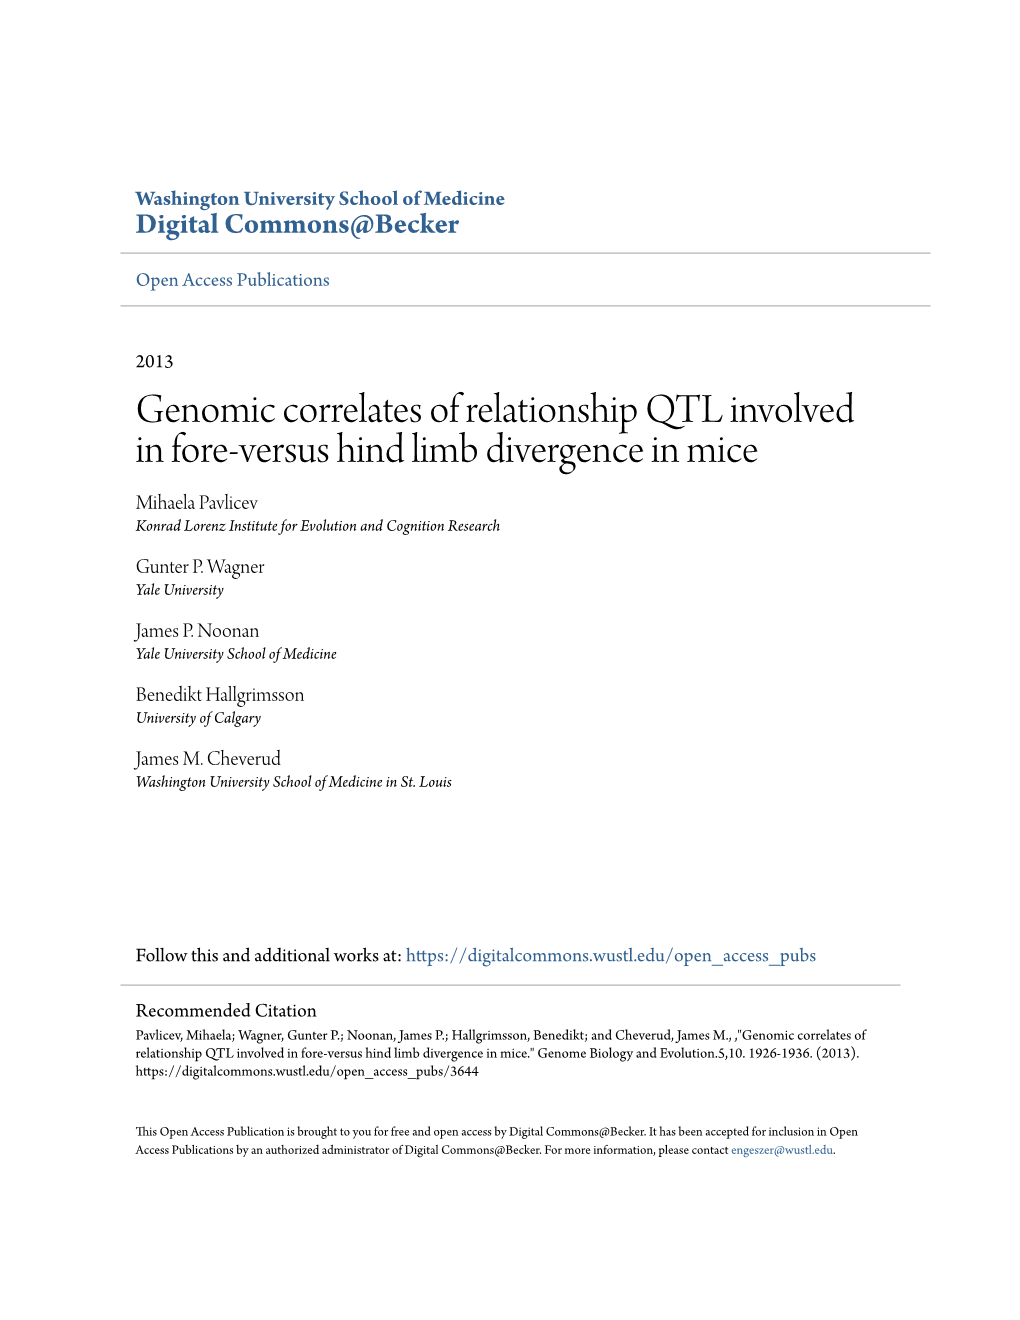 Genomic Correlates of Relationship QTL Involved in Fore-Versus Hind